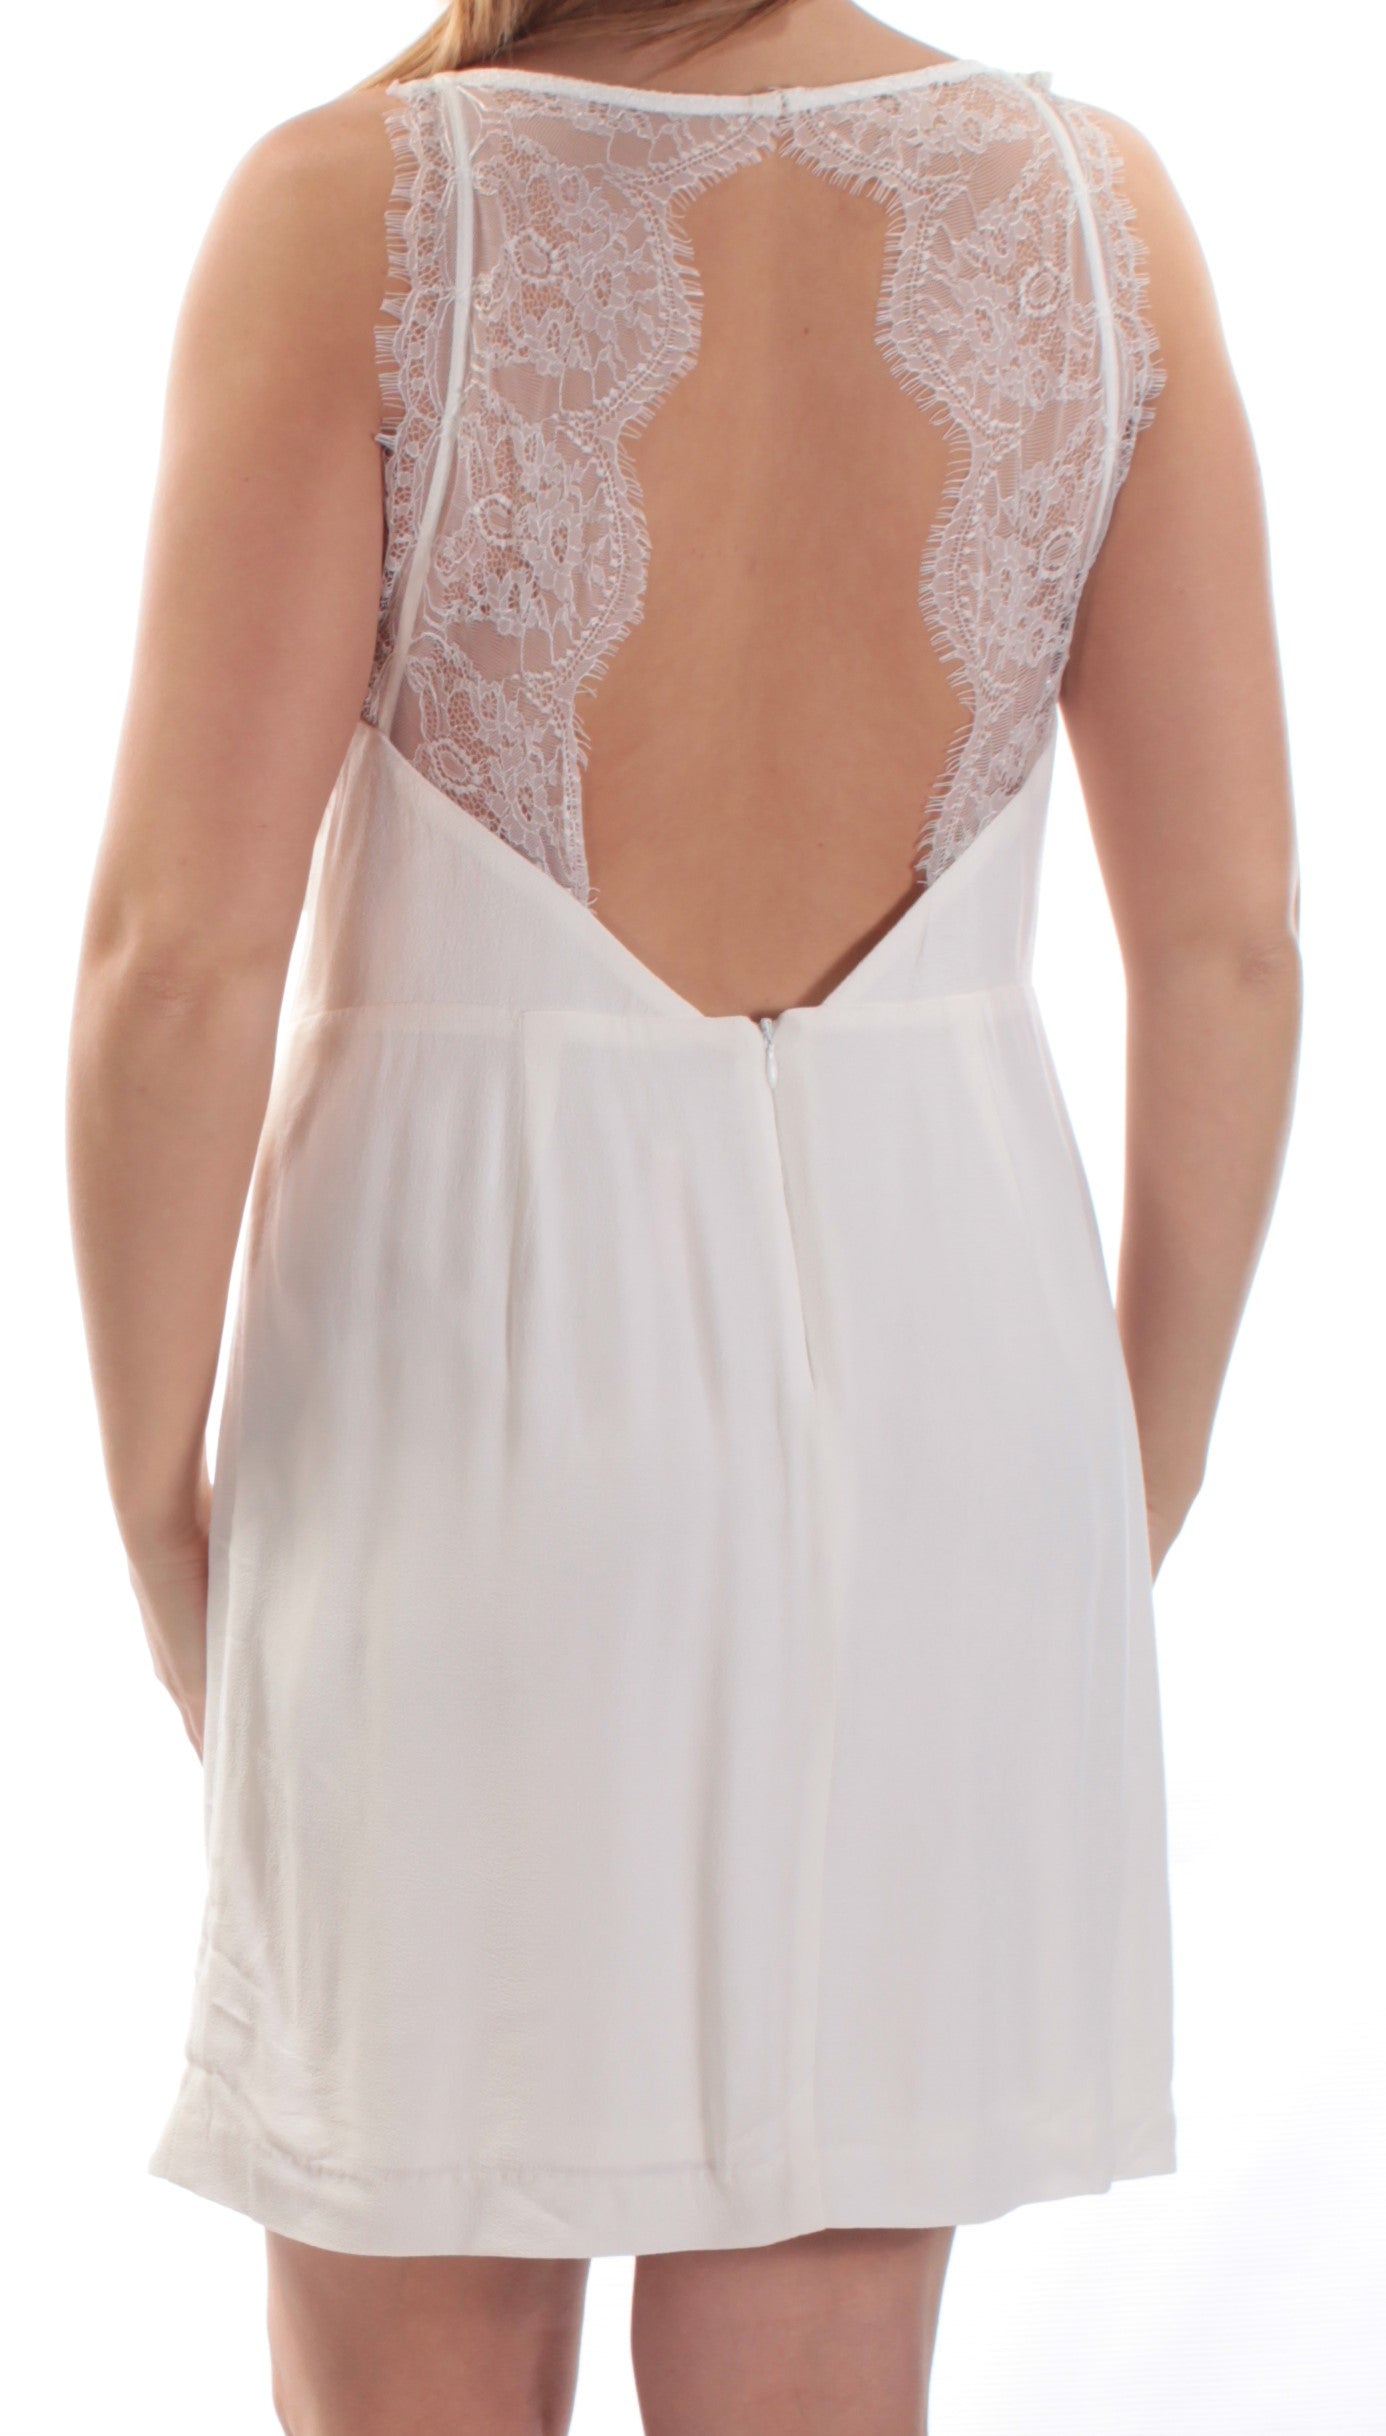 KENSIE Womens White Lace Spaghetti Strap Square Neck Above The Knee Evening Sheath Dress